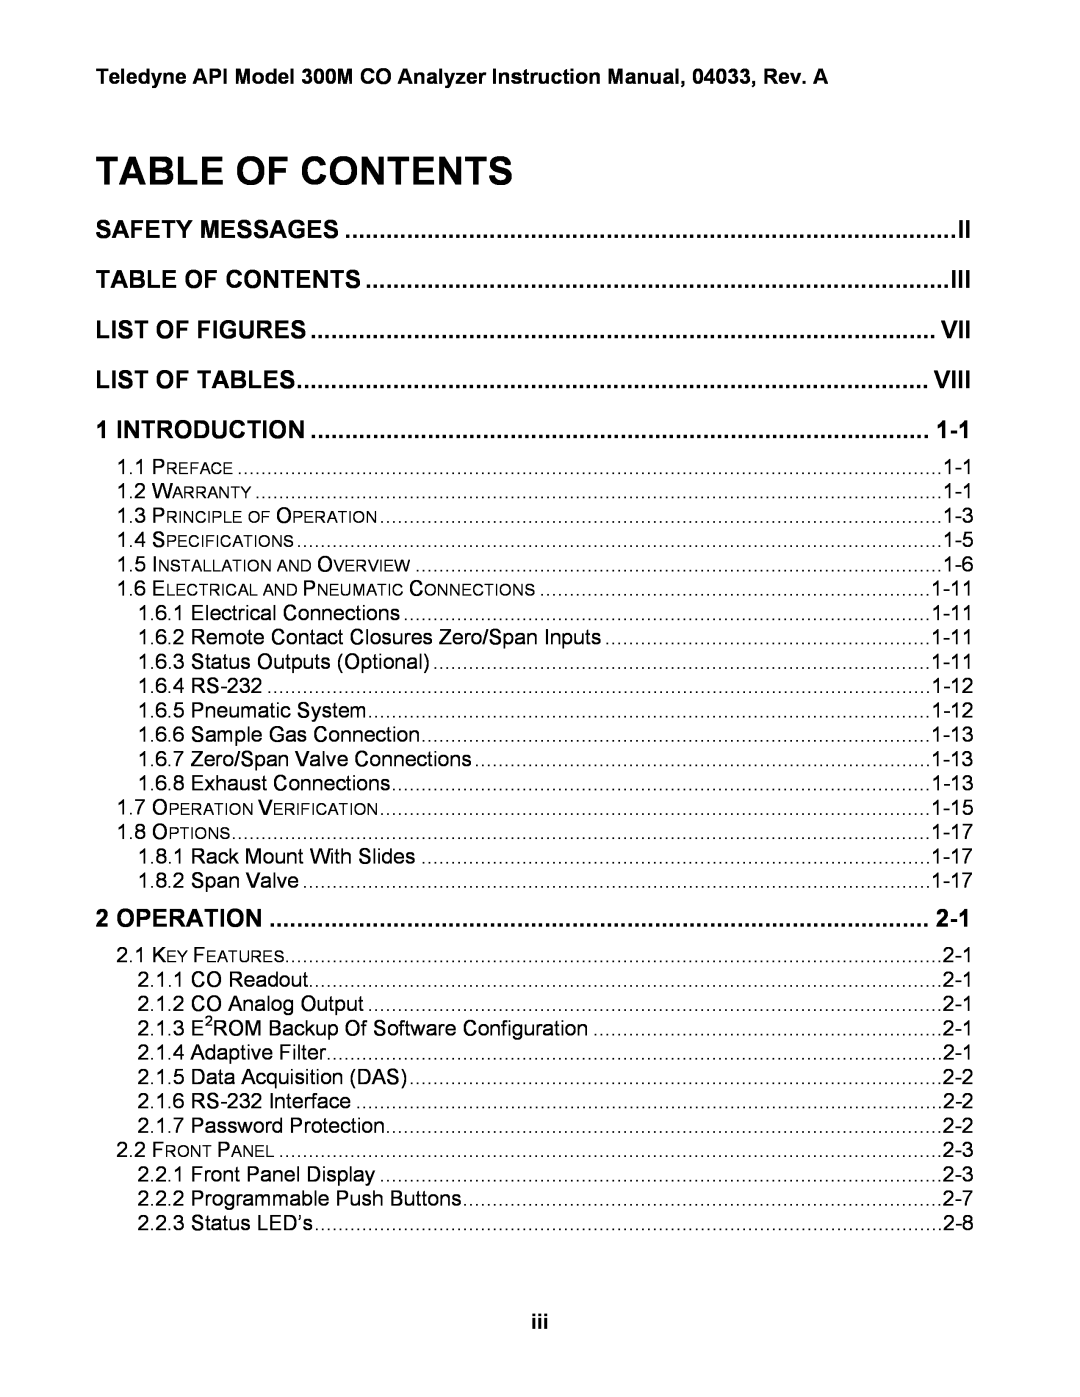 Teledyne 300M instruction manual Table Of Contents, List Of Figures, List Of Tables, Viii, Introduction, Operation 